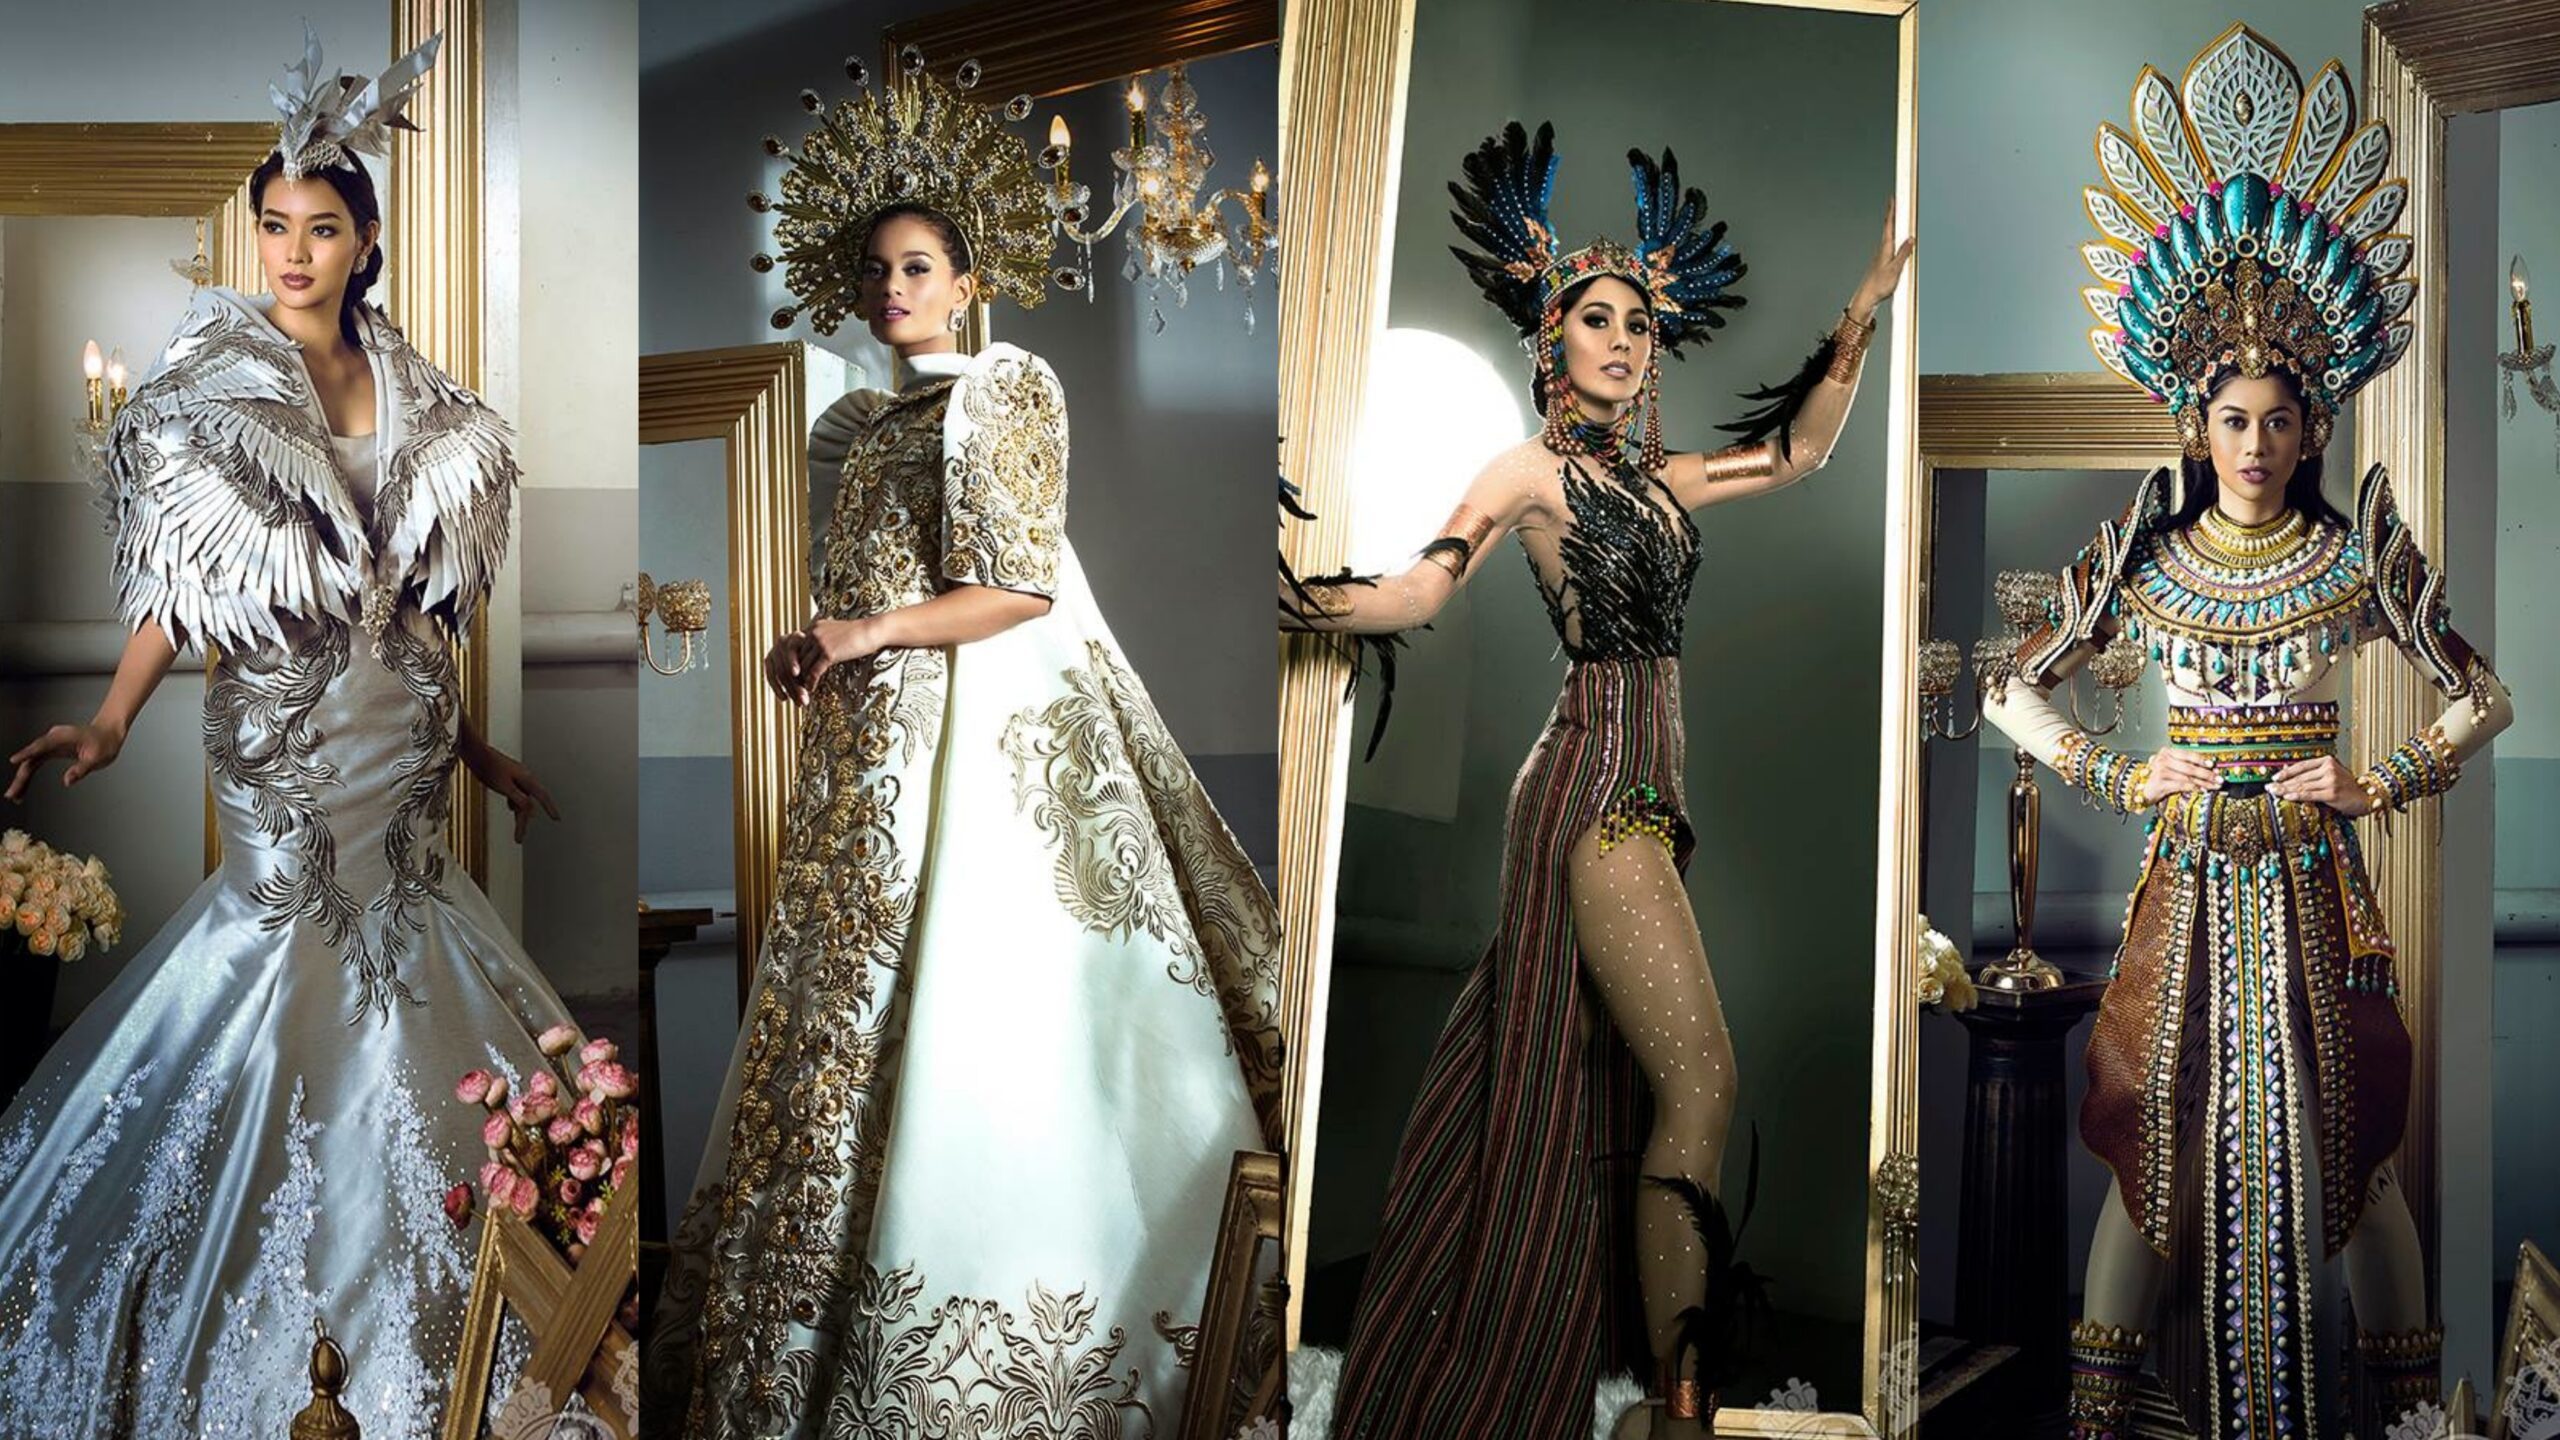 LOOK: The Bb Pilipinas 2017 candidates in stunning national costumes